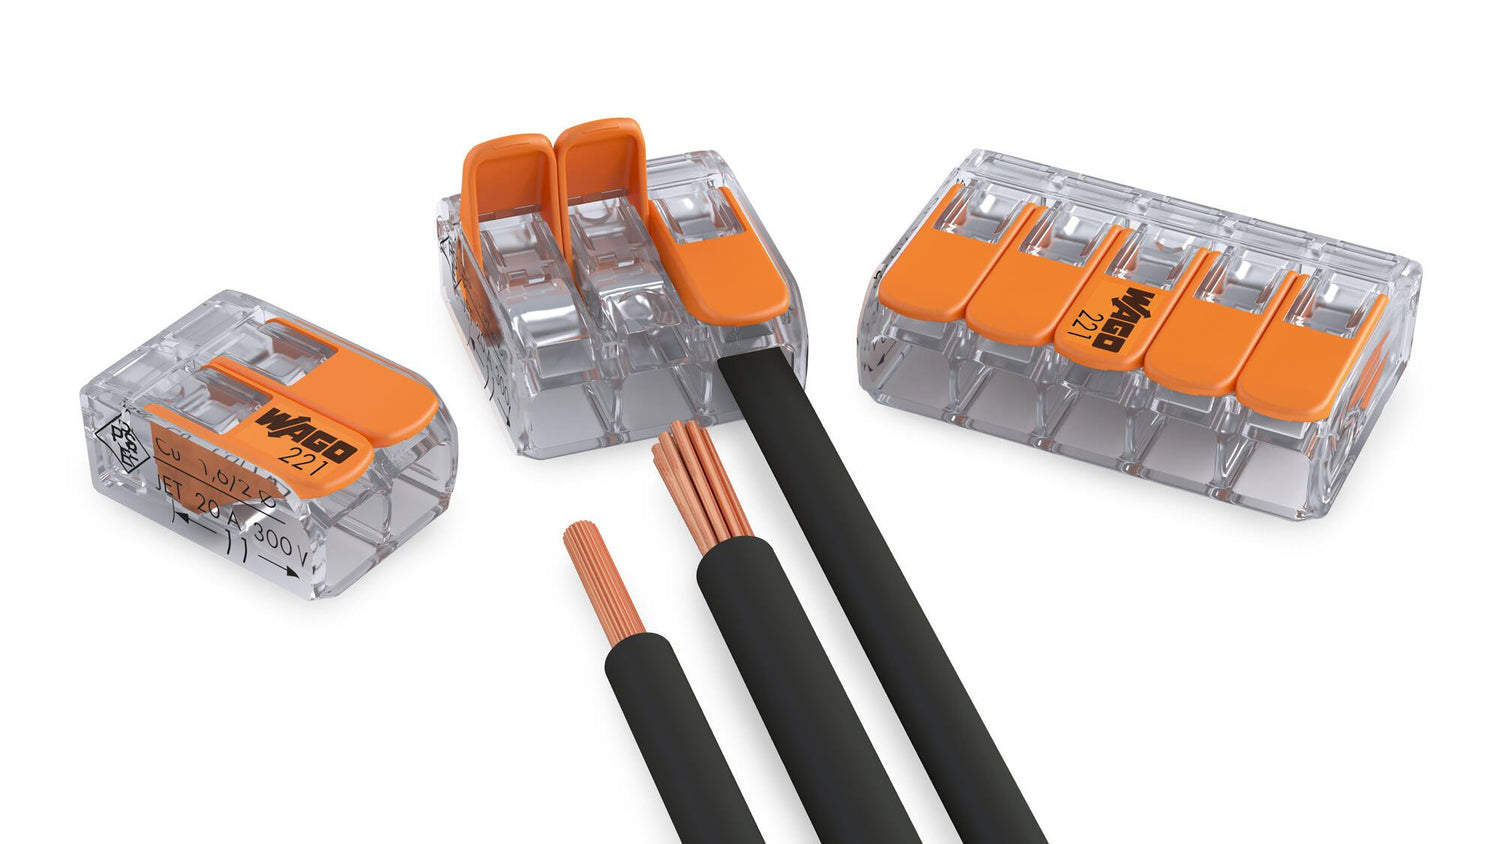 Wago 221 Series Splicing Connectors for All Types of Conductors